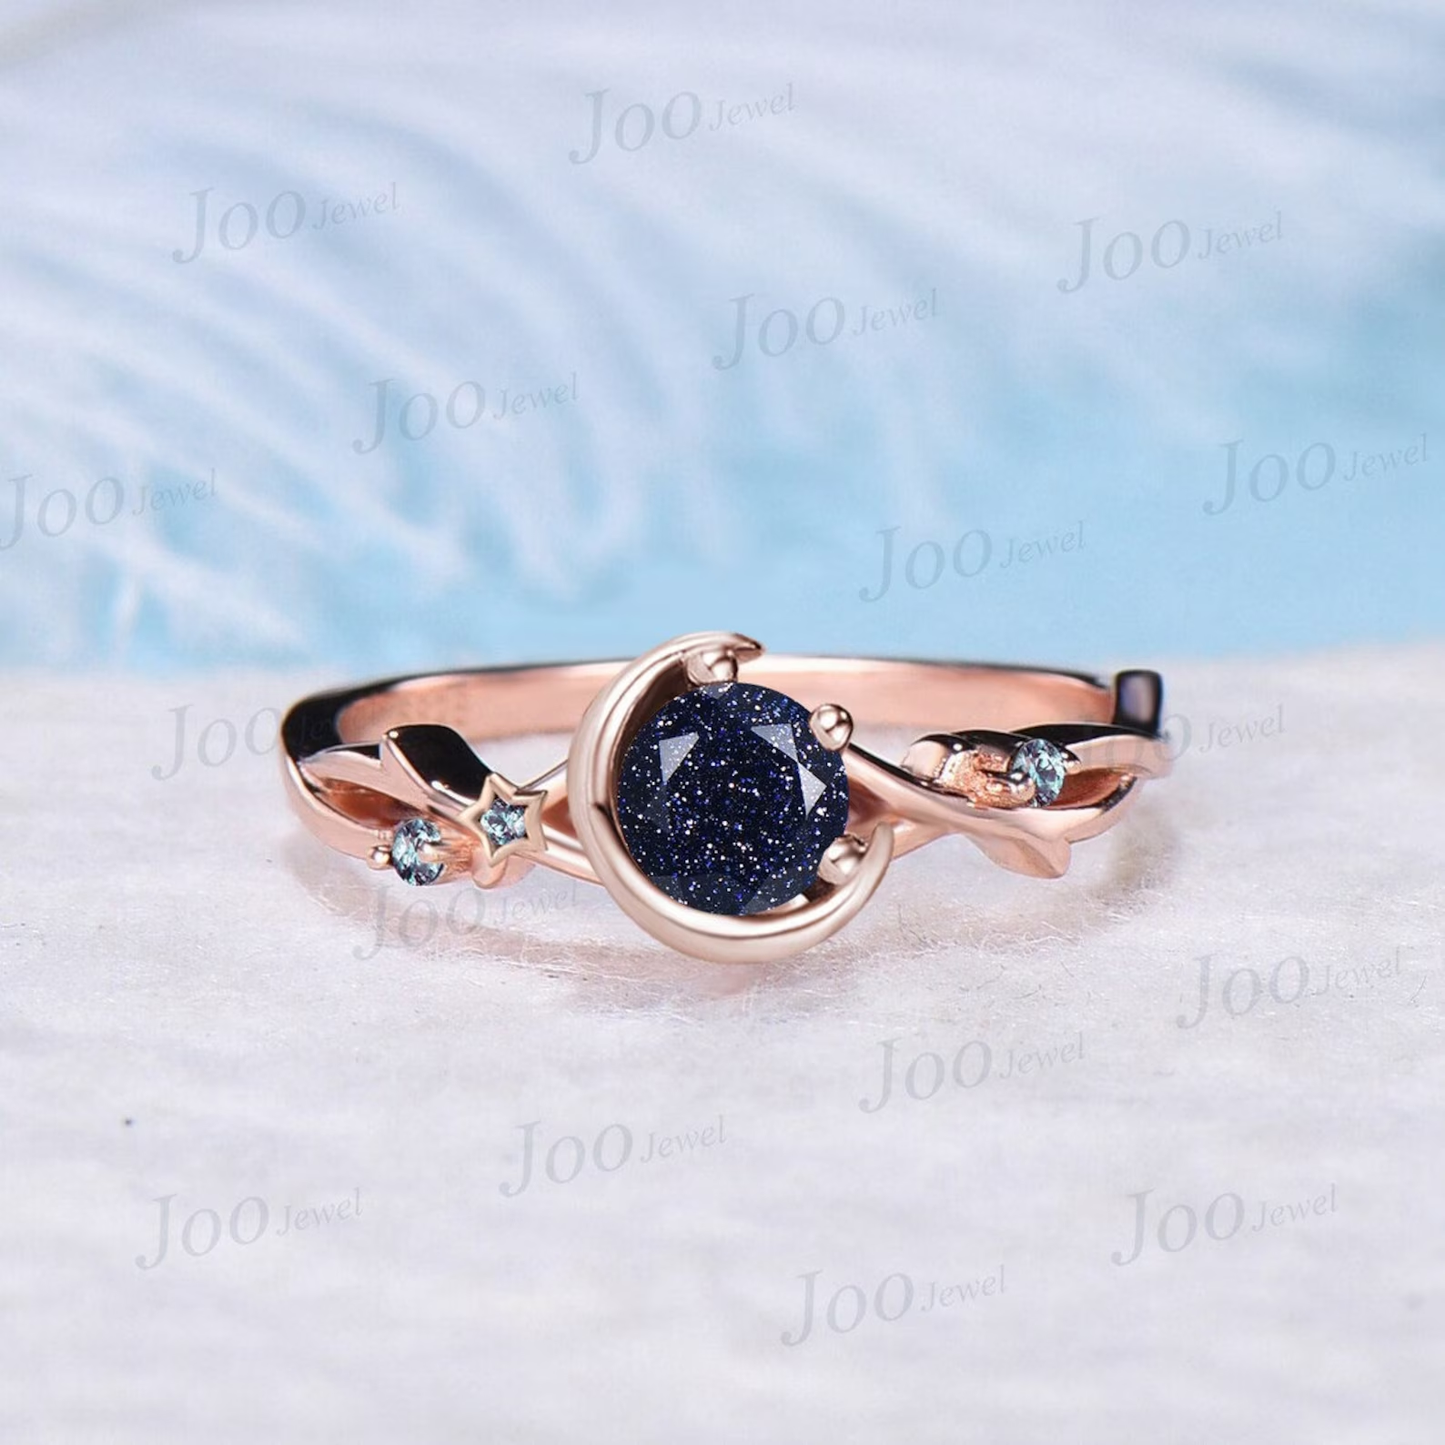 5mm Round Galaxy Blue Sandstone Ring Starry Sky Black Gold Moon Star Cluster Amethyst Twig Vine Blue Goldstone Ring Celestial Promise Rings